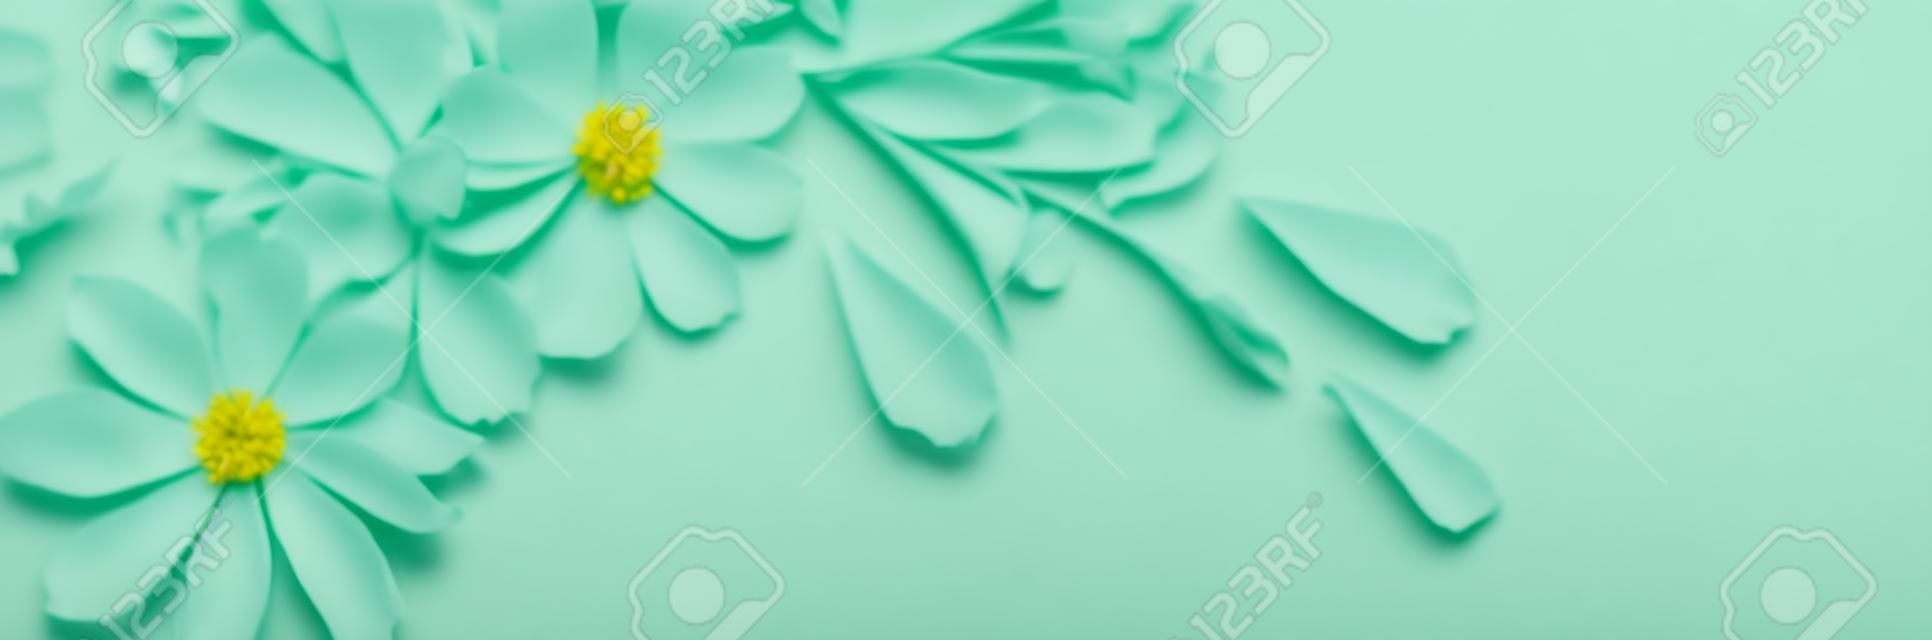 white flowers on green paper background